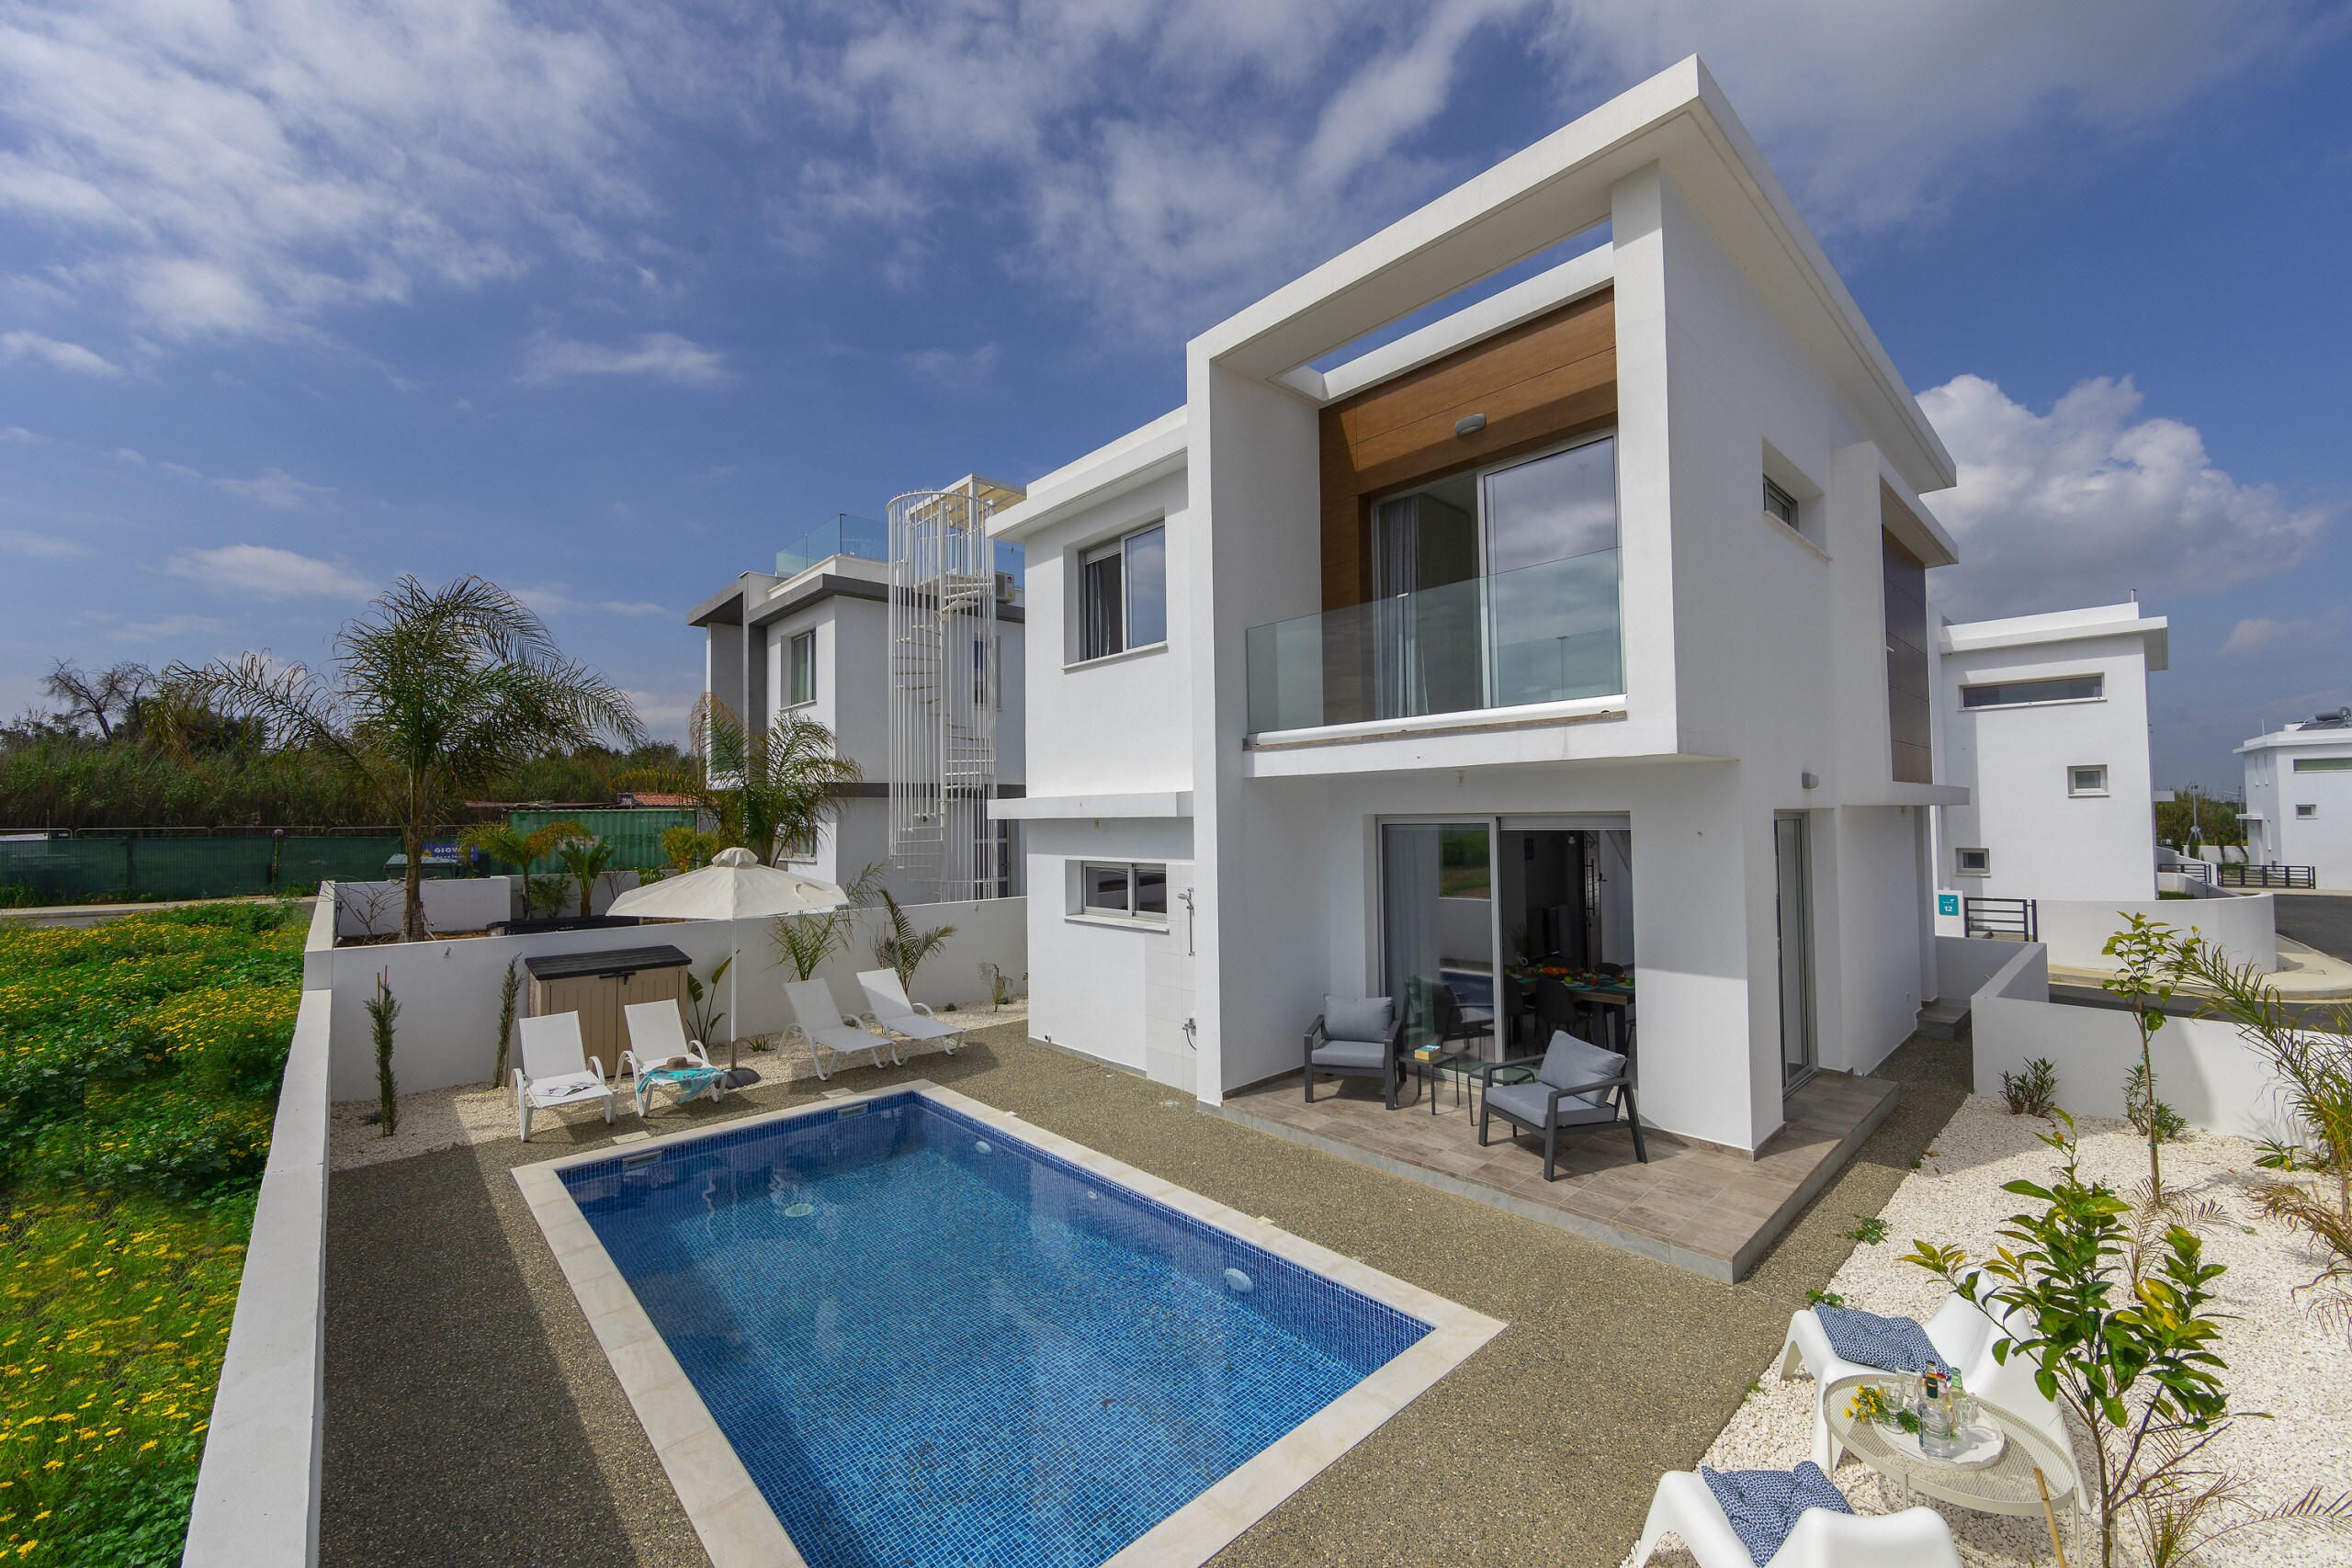 Property Image 1 - Modern and Spacious Holiday Villa in Quiet Kapparis